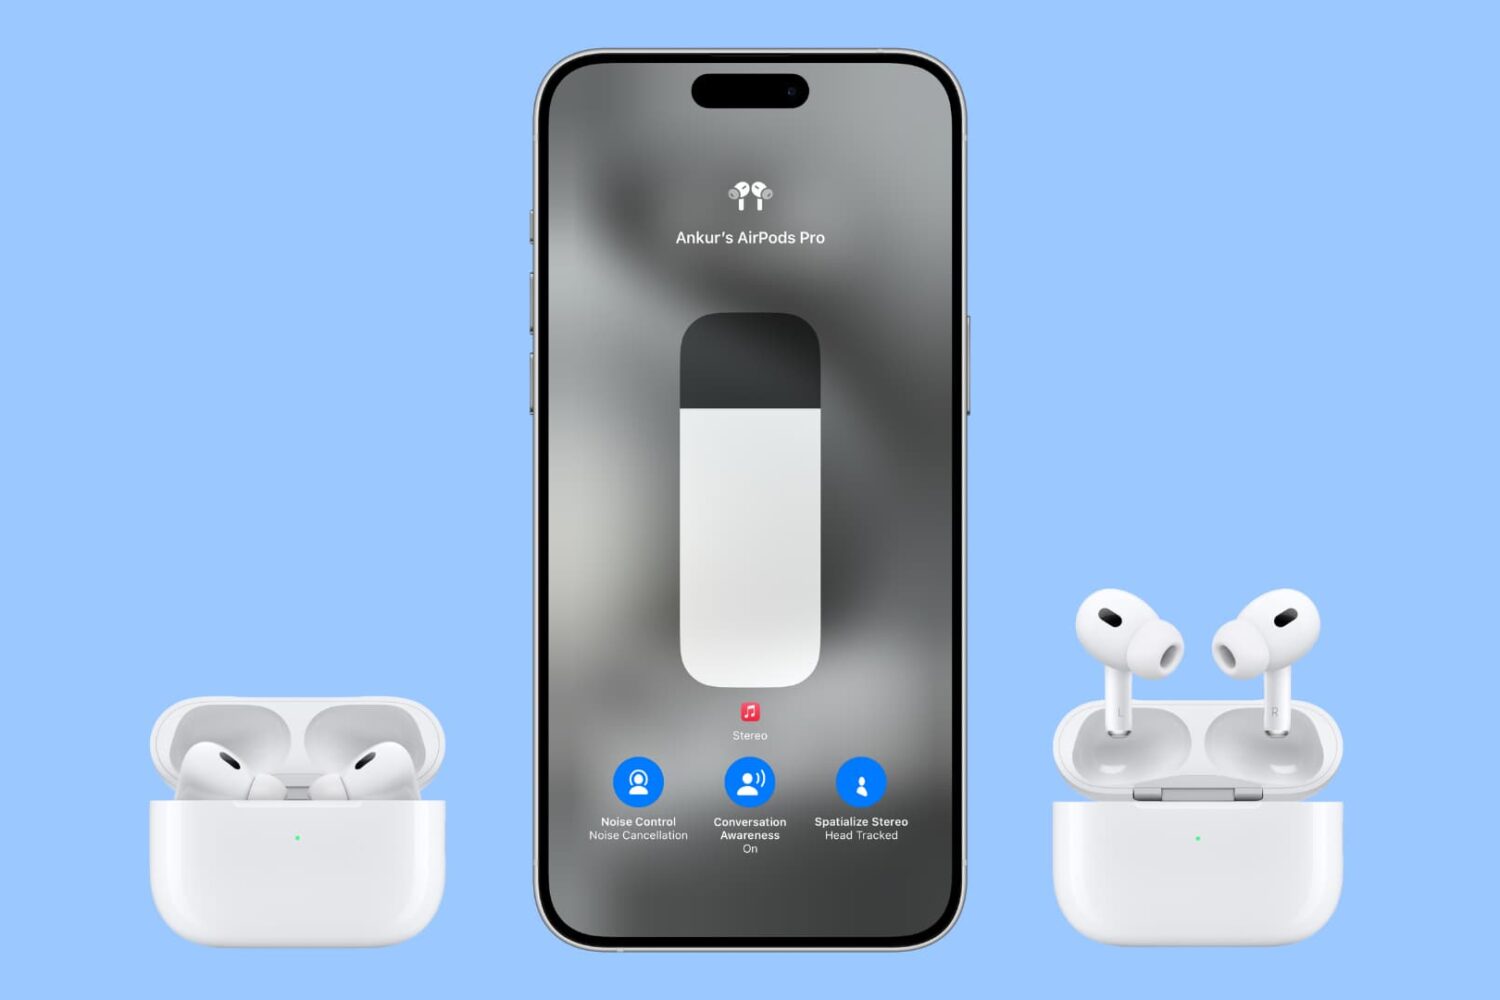 iPhone showing volume options with two AirPods Pros nearby